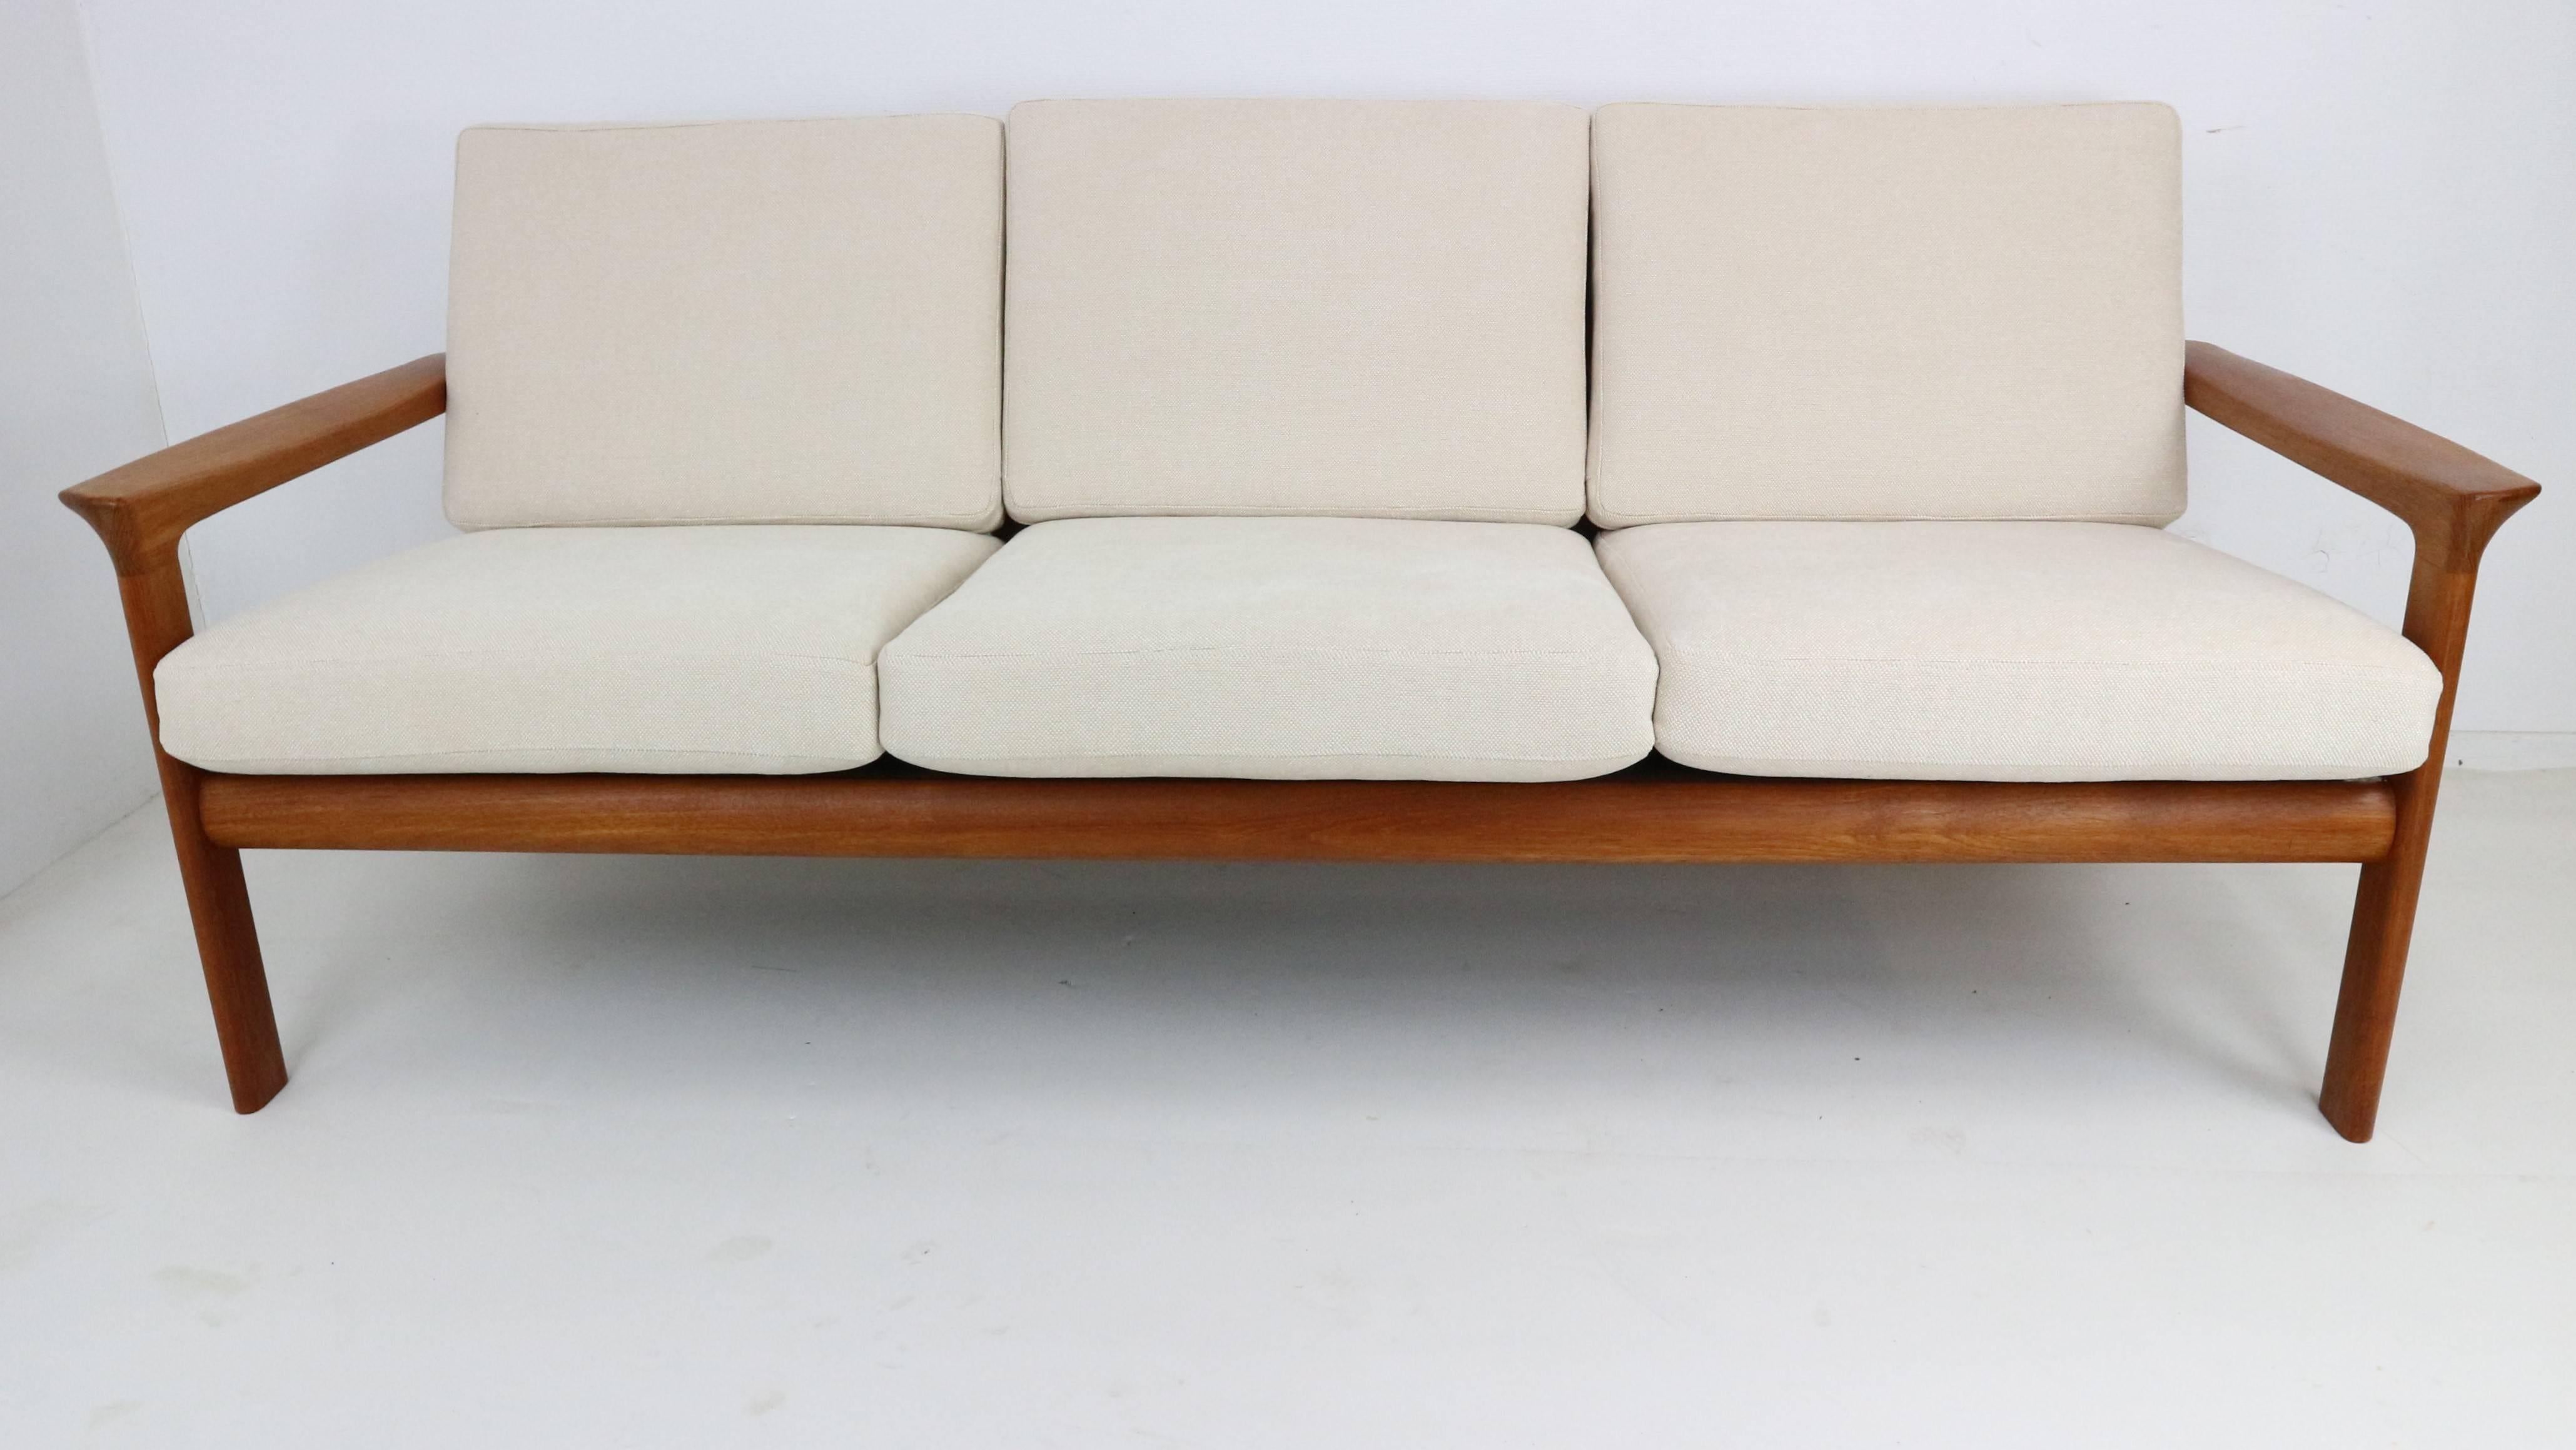 This 'Borneo' three-seat sofa was designed by Sven Ellekaer for Komfort, Denmark in the 1960s. It features a beautiful shaped solid teak frame with new of-white/light-beige upholstery and new webbing.
Marked by the maker.
Also matching 2-seater and